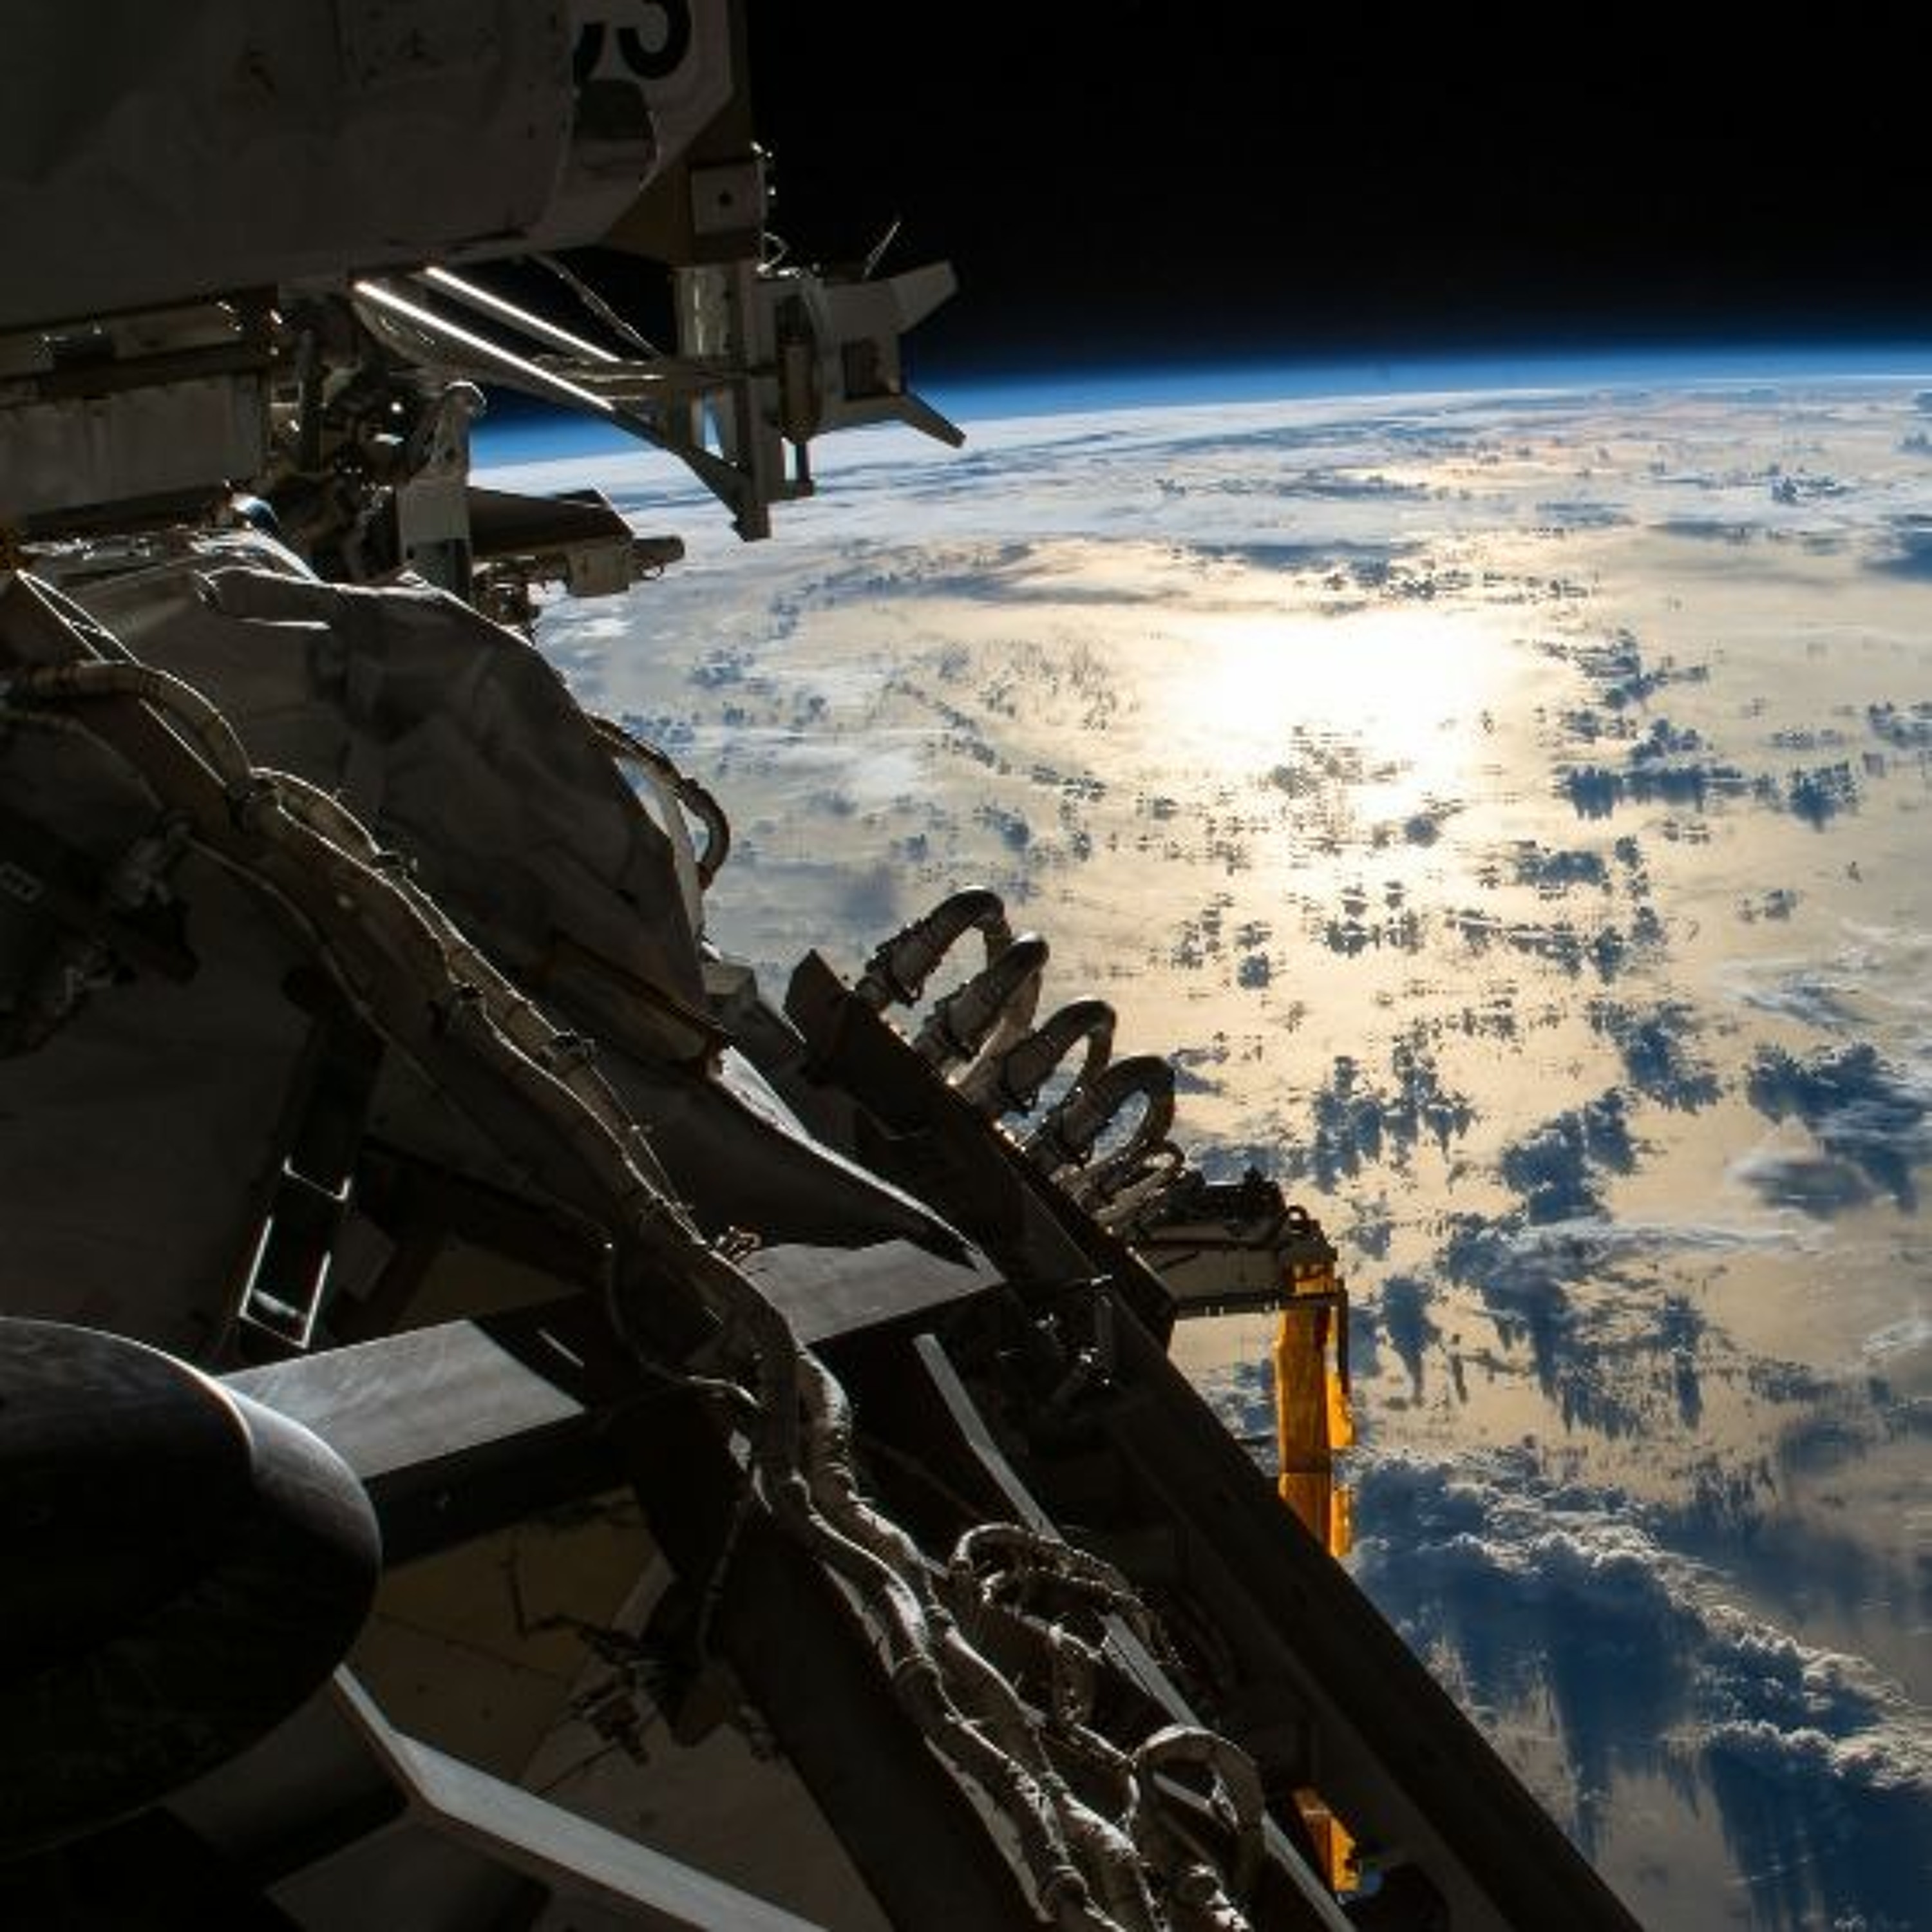 A Look Ahead at the Space Exploration Economy